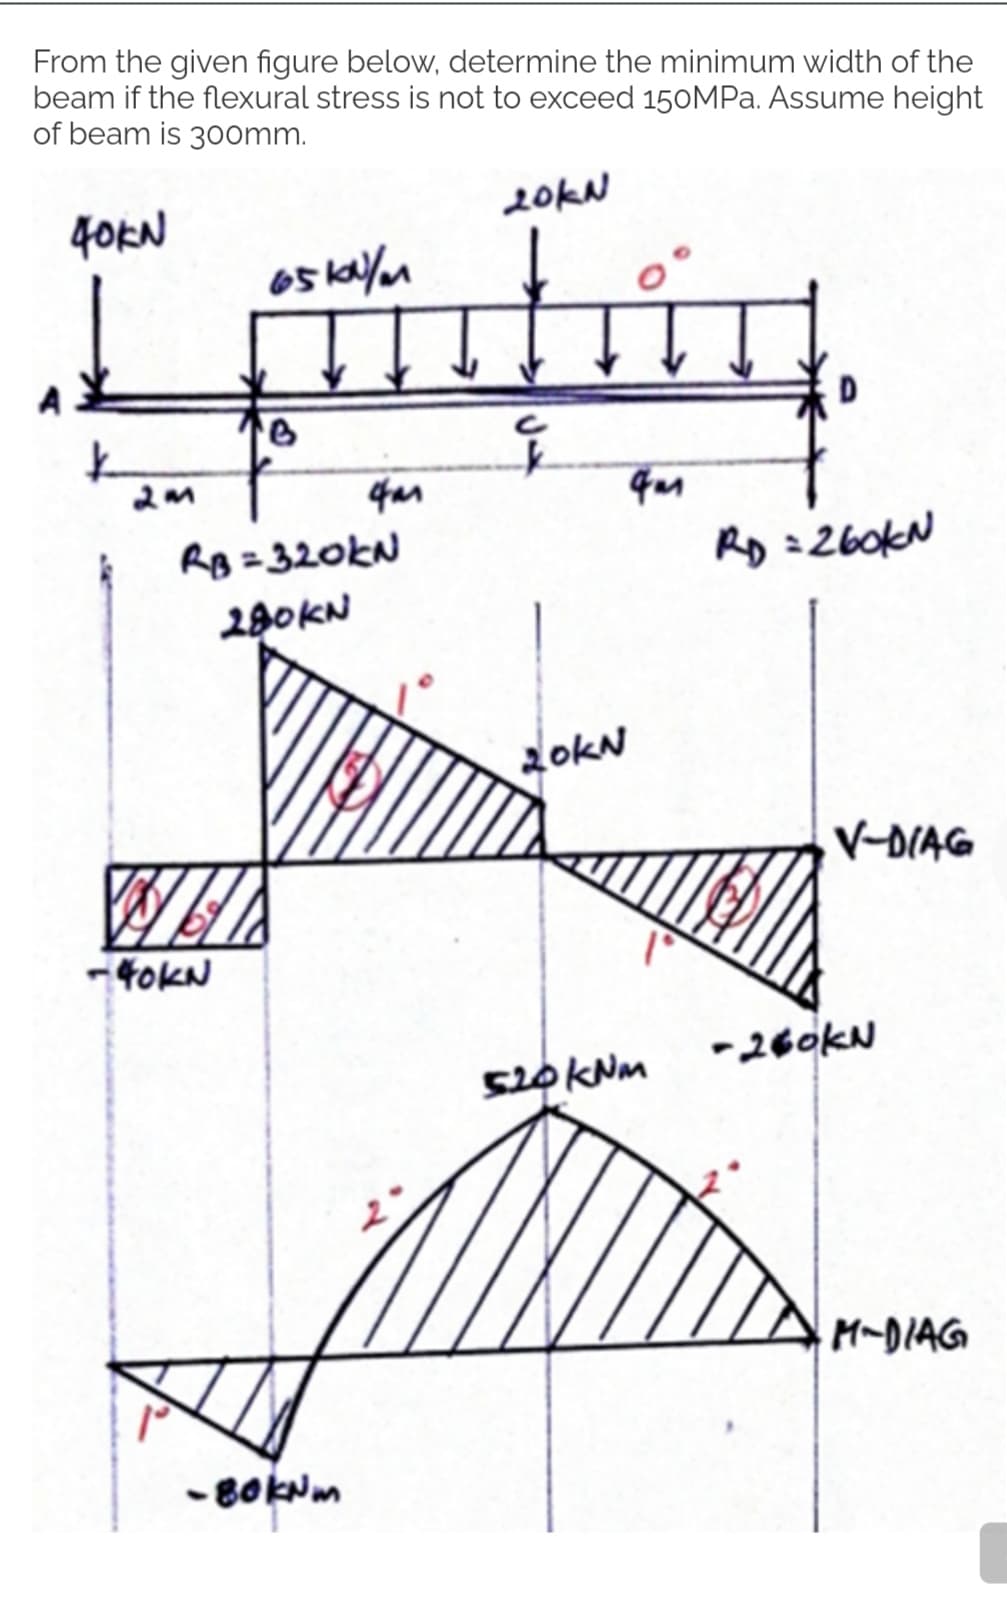 From the given figure below, determine the minimum width of the
beam if the flexural stress is not to exceed 150MPa. Assume height
of beam is 300mm.
40KN
k
pº
RB=320kN
280KN
2M
65100/m
-40kN
-BOKNM
4m
20KN
도
20KN
qu
520 kNm
RD = 260KN
V-DIAG
-260kN
M-DIAG